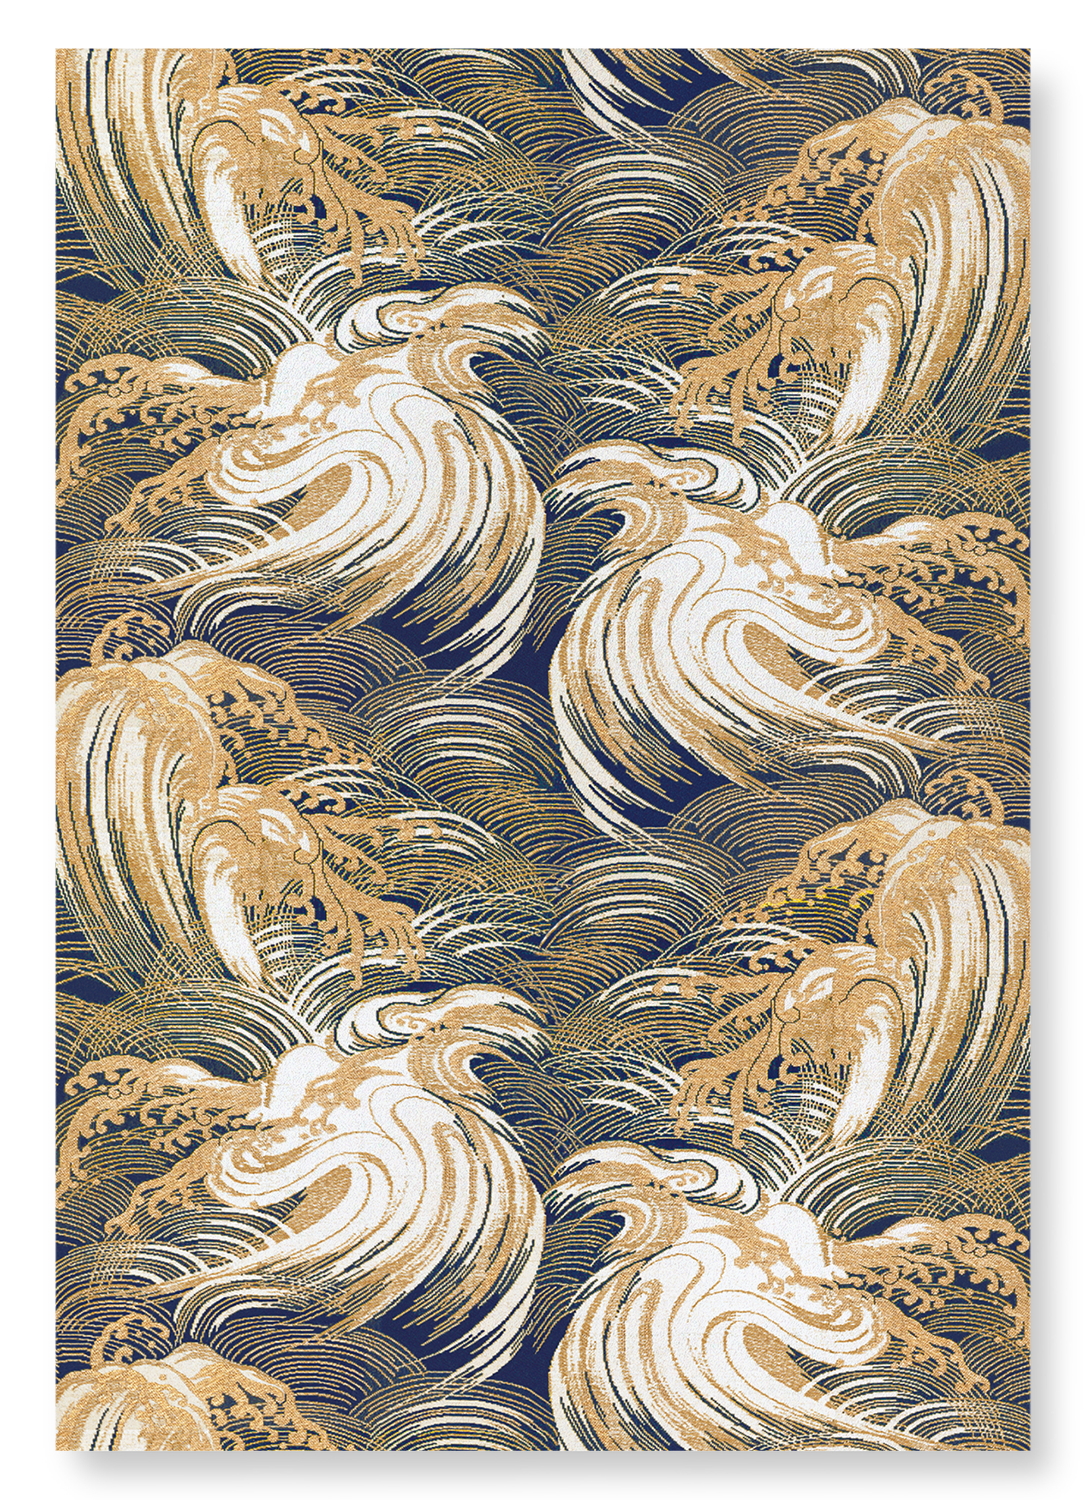 DESIGN OF WAVES (EARLY 20TH C.)